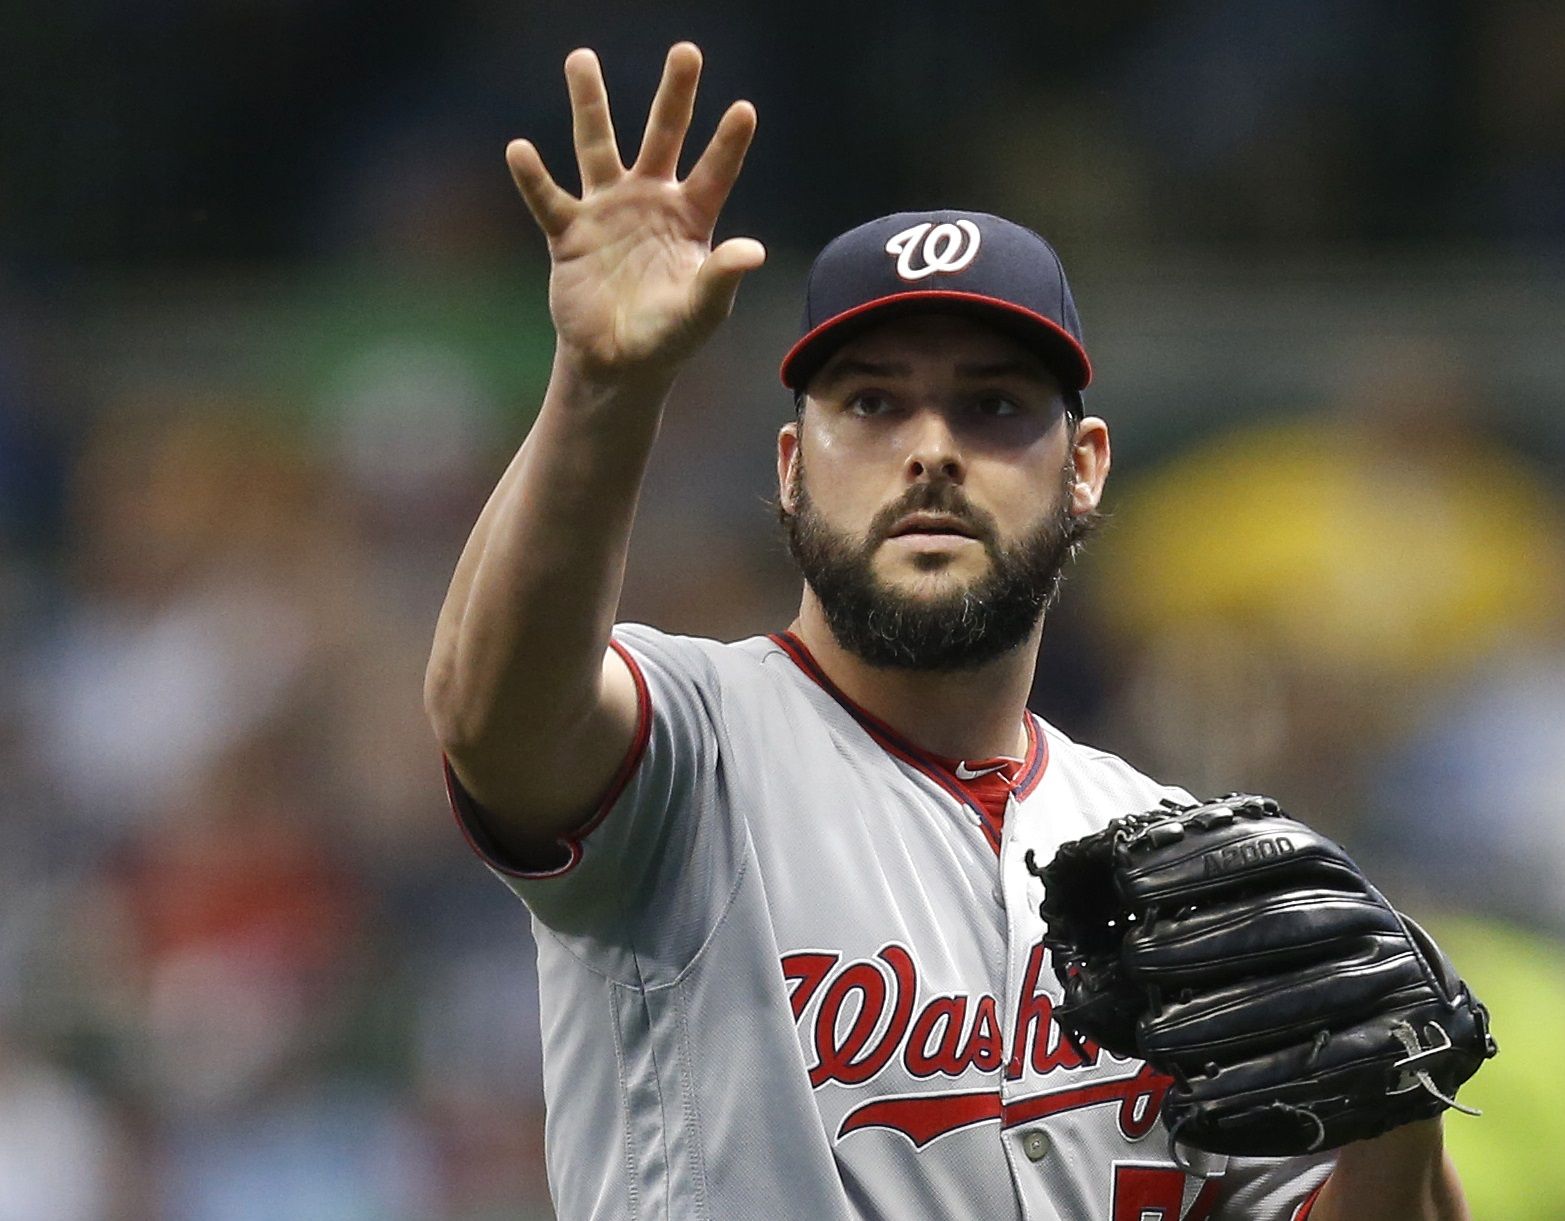 MILWAUKEE, WI - SEPTEMBER 01: Tanner Roark #57 of the Washington Nationals  during the first inning against the Milwaukee Brewers at Miller Park on September 01, 2017 in Milwaukee, WI. (Photo by Mike McGinnis/Getty Images)